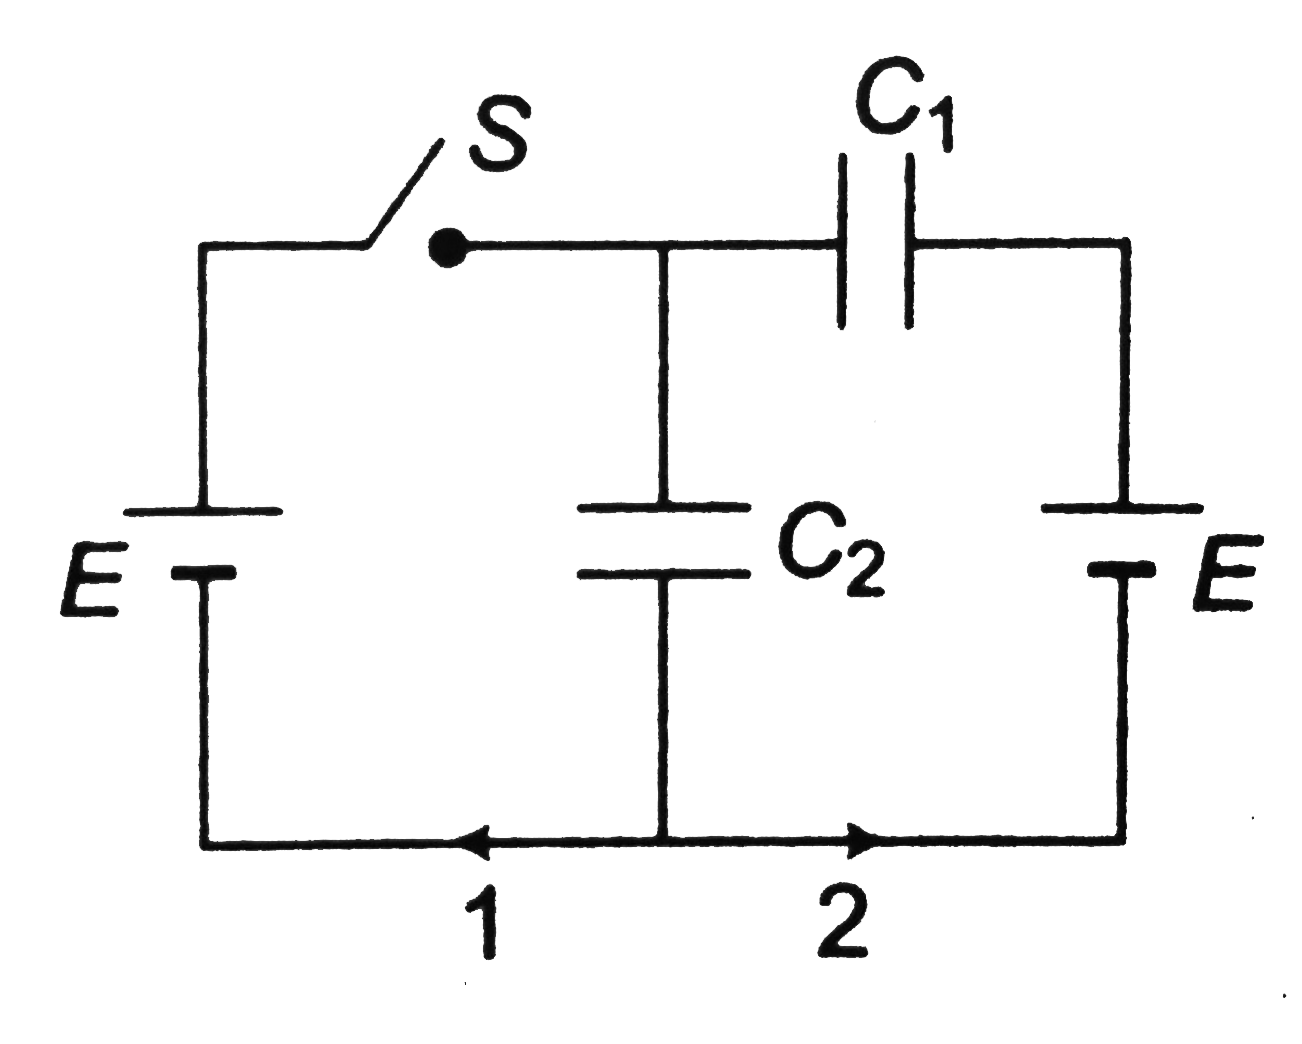 In the given circuit diagram, find the charges which flow through directions 1 and 2 when switch S is closed.